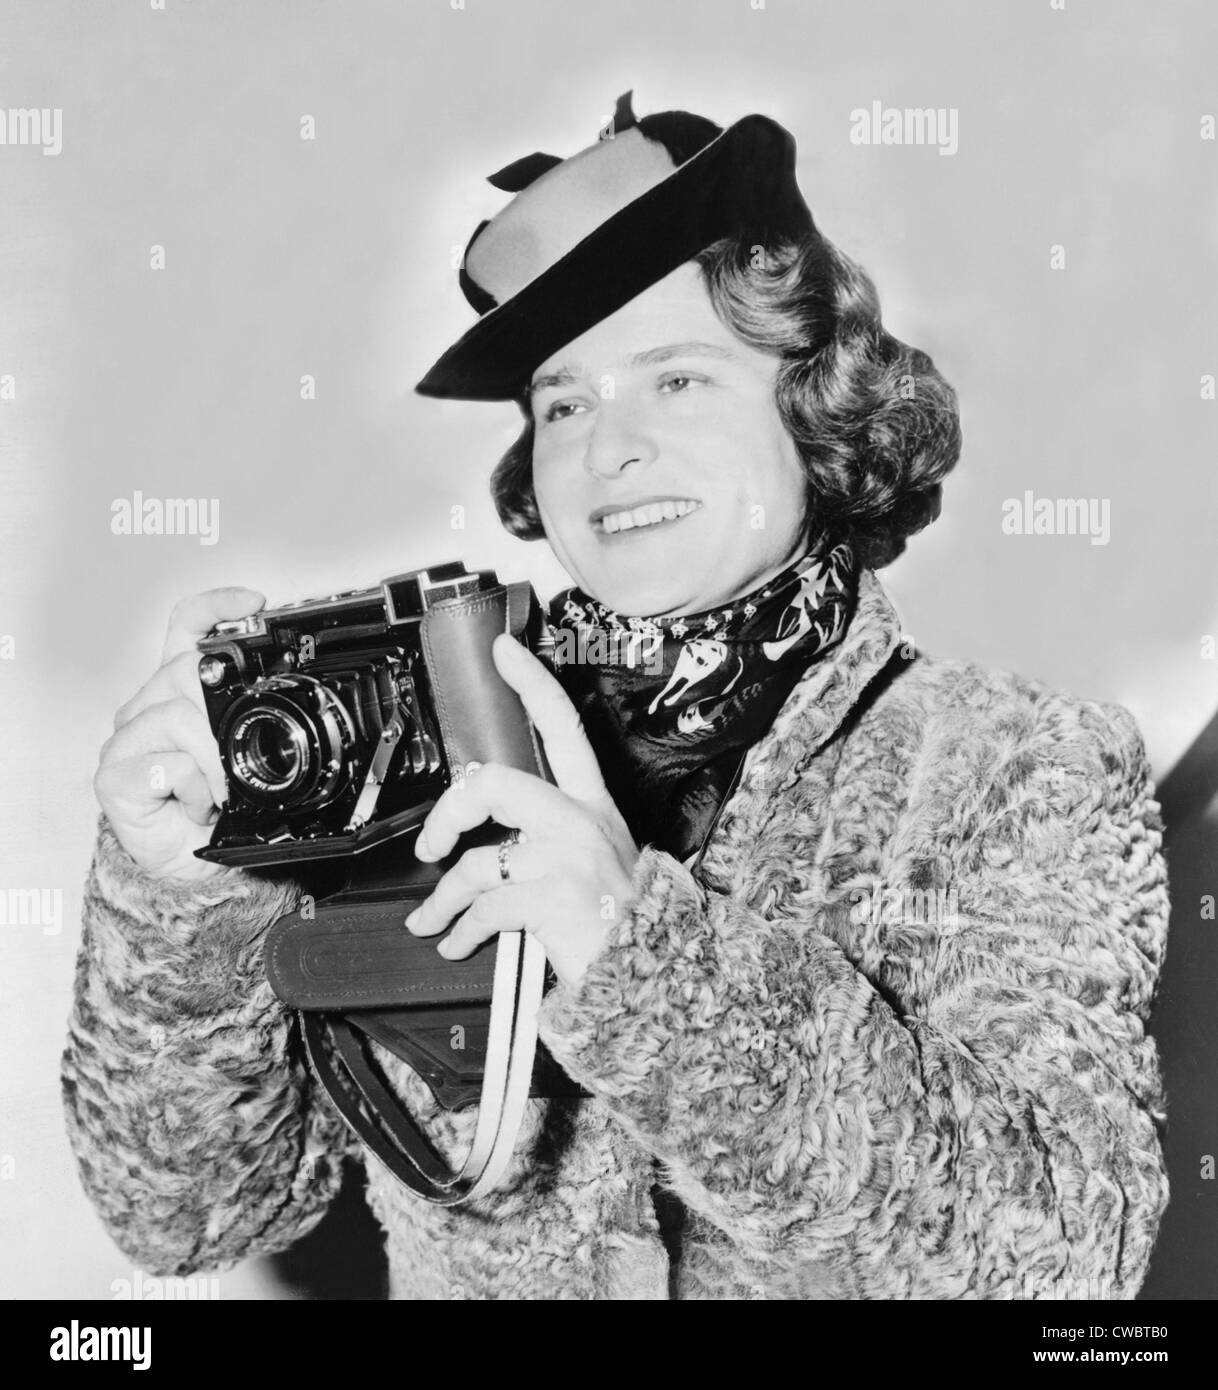 Margaret Bourke-White (1904-1971), one of the most prominent photojournalists of the 20th century. Her credits include the Stock Photo